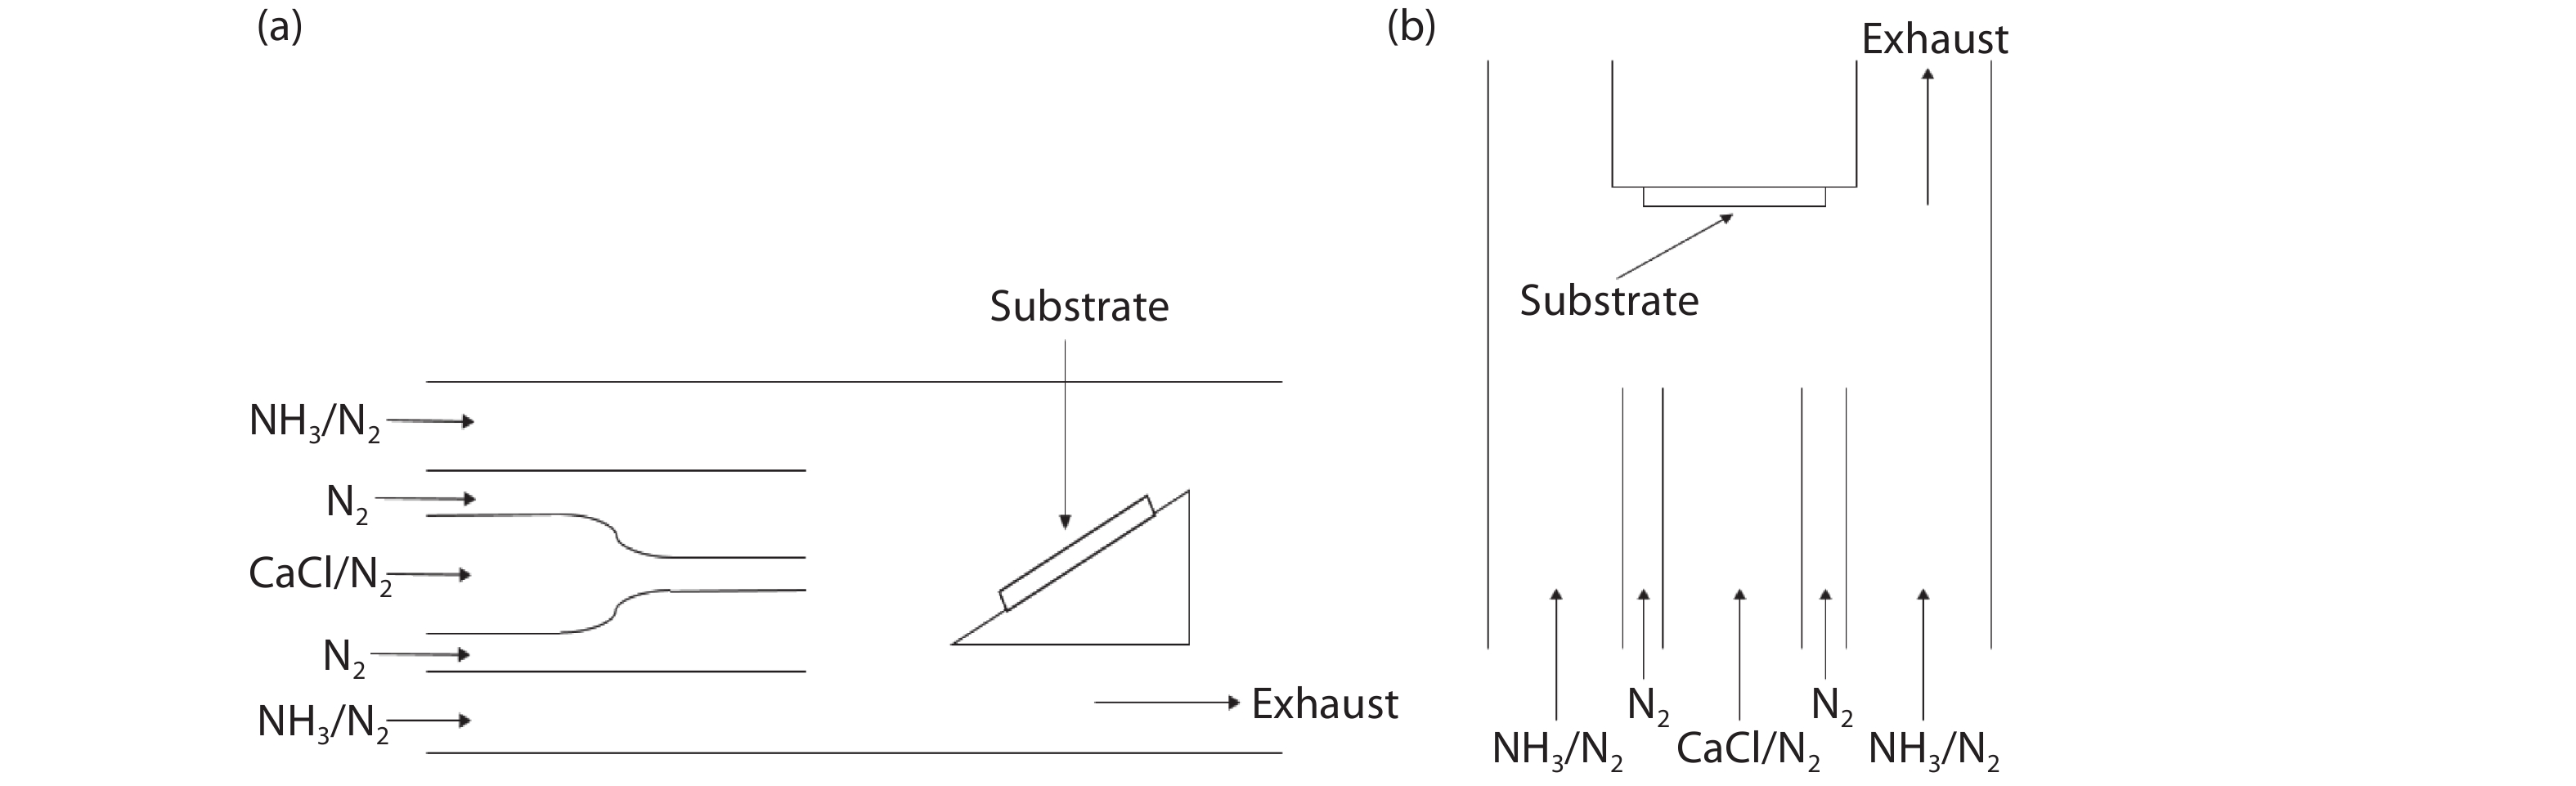 Schematic view of (a) horizontal HVPE reactor and (b) vertical HVPE reactor.